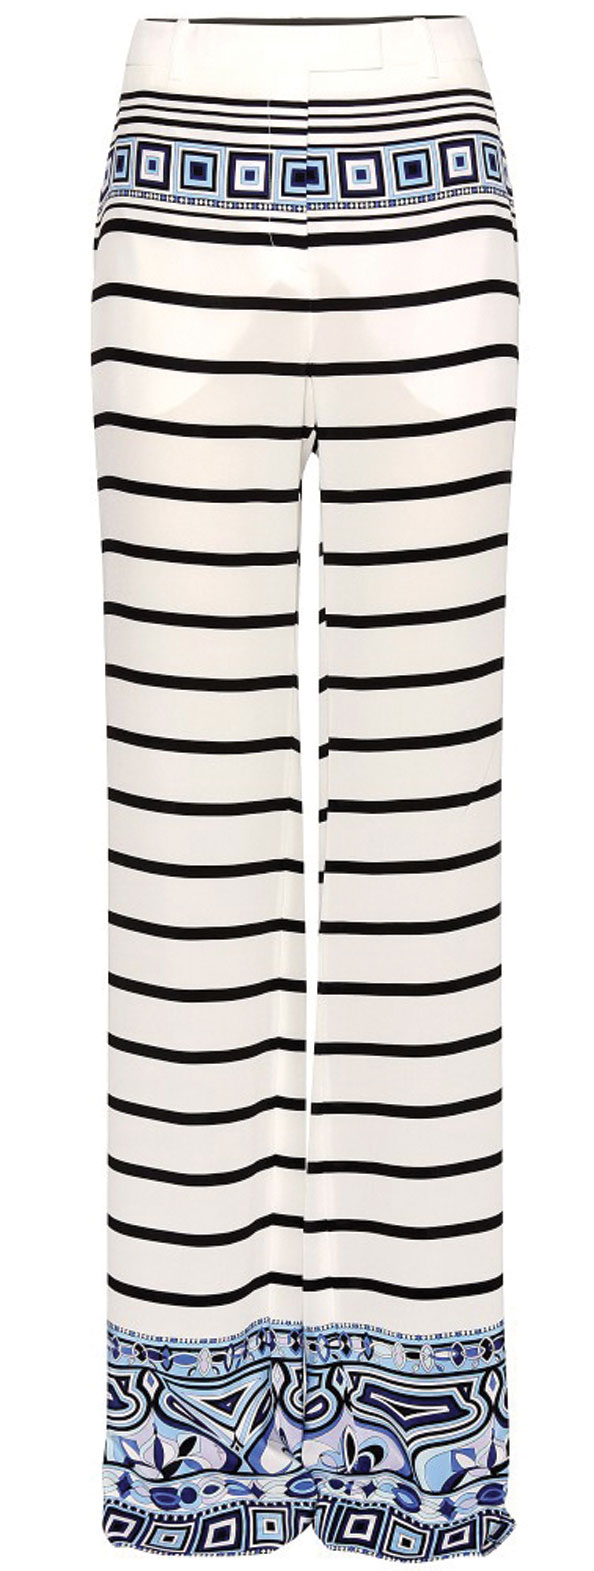 Trending, striped trousers from Emilio Pucci, mytheresa.com